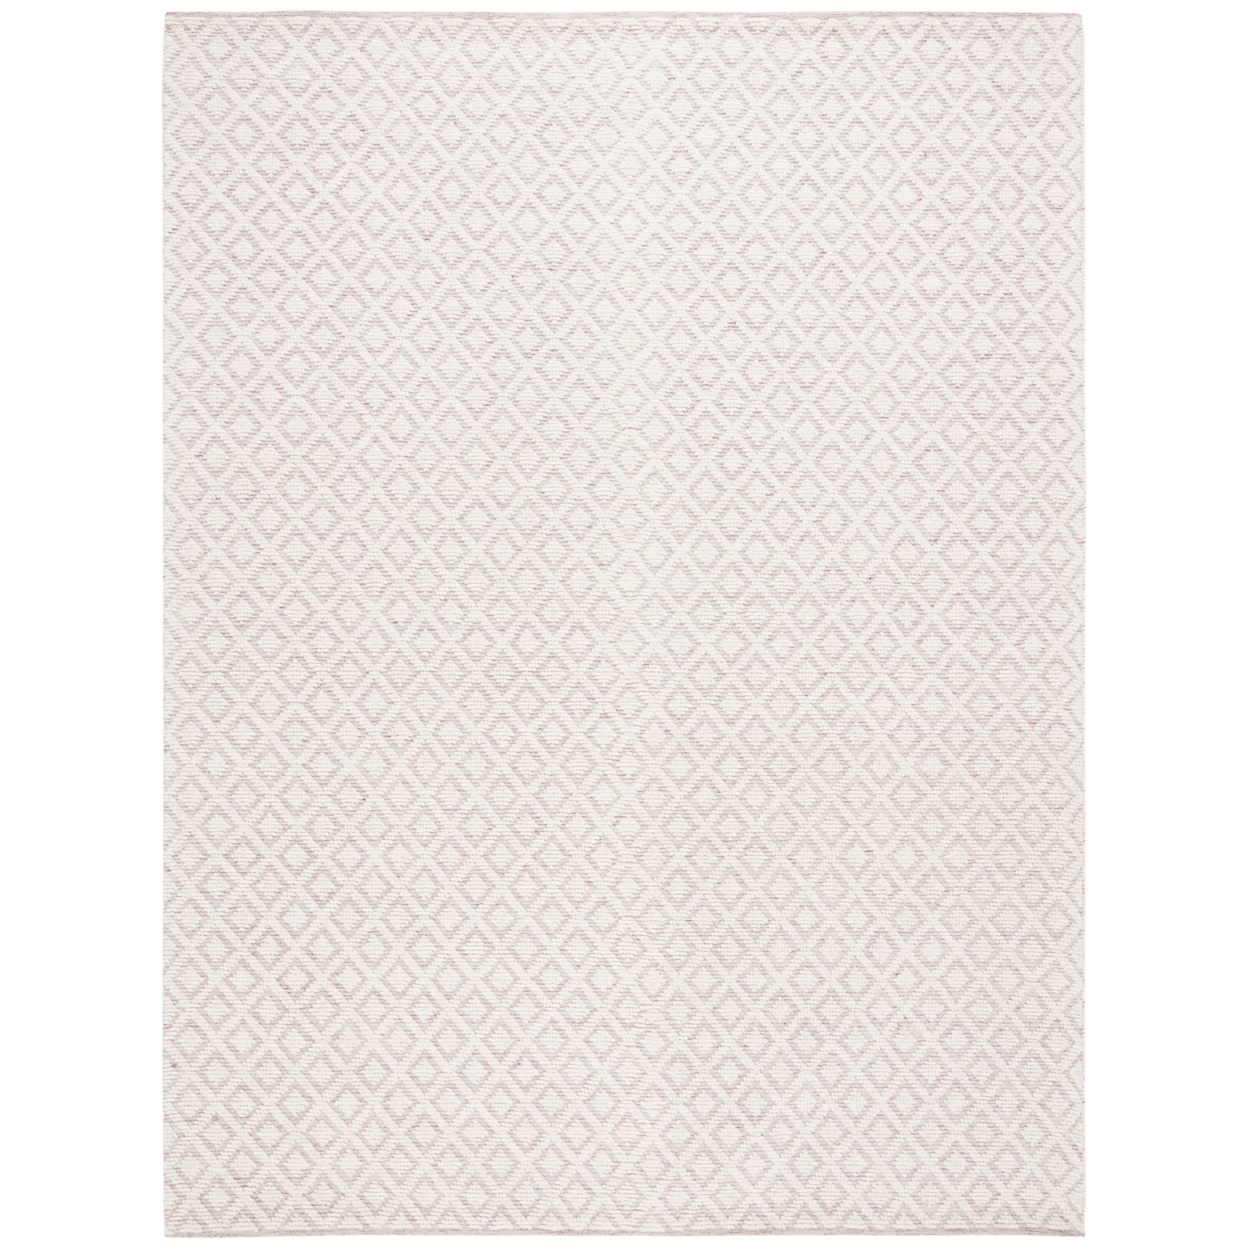 SAFAVIEH Vermont VRM304Q Handwoven Ivory / Red Rug - 6' Square